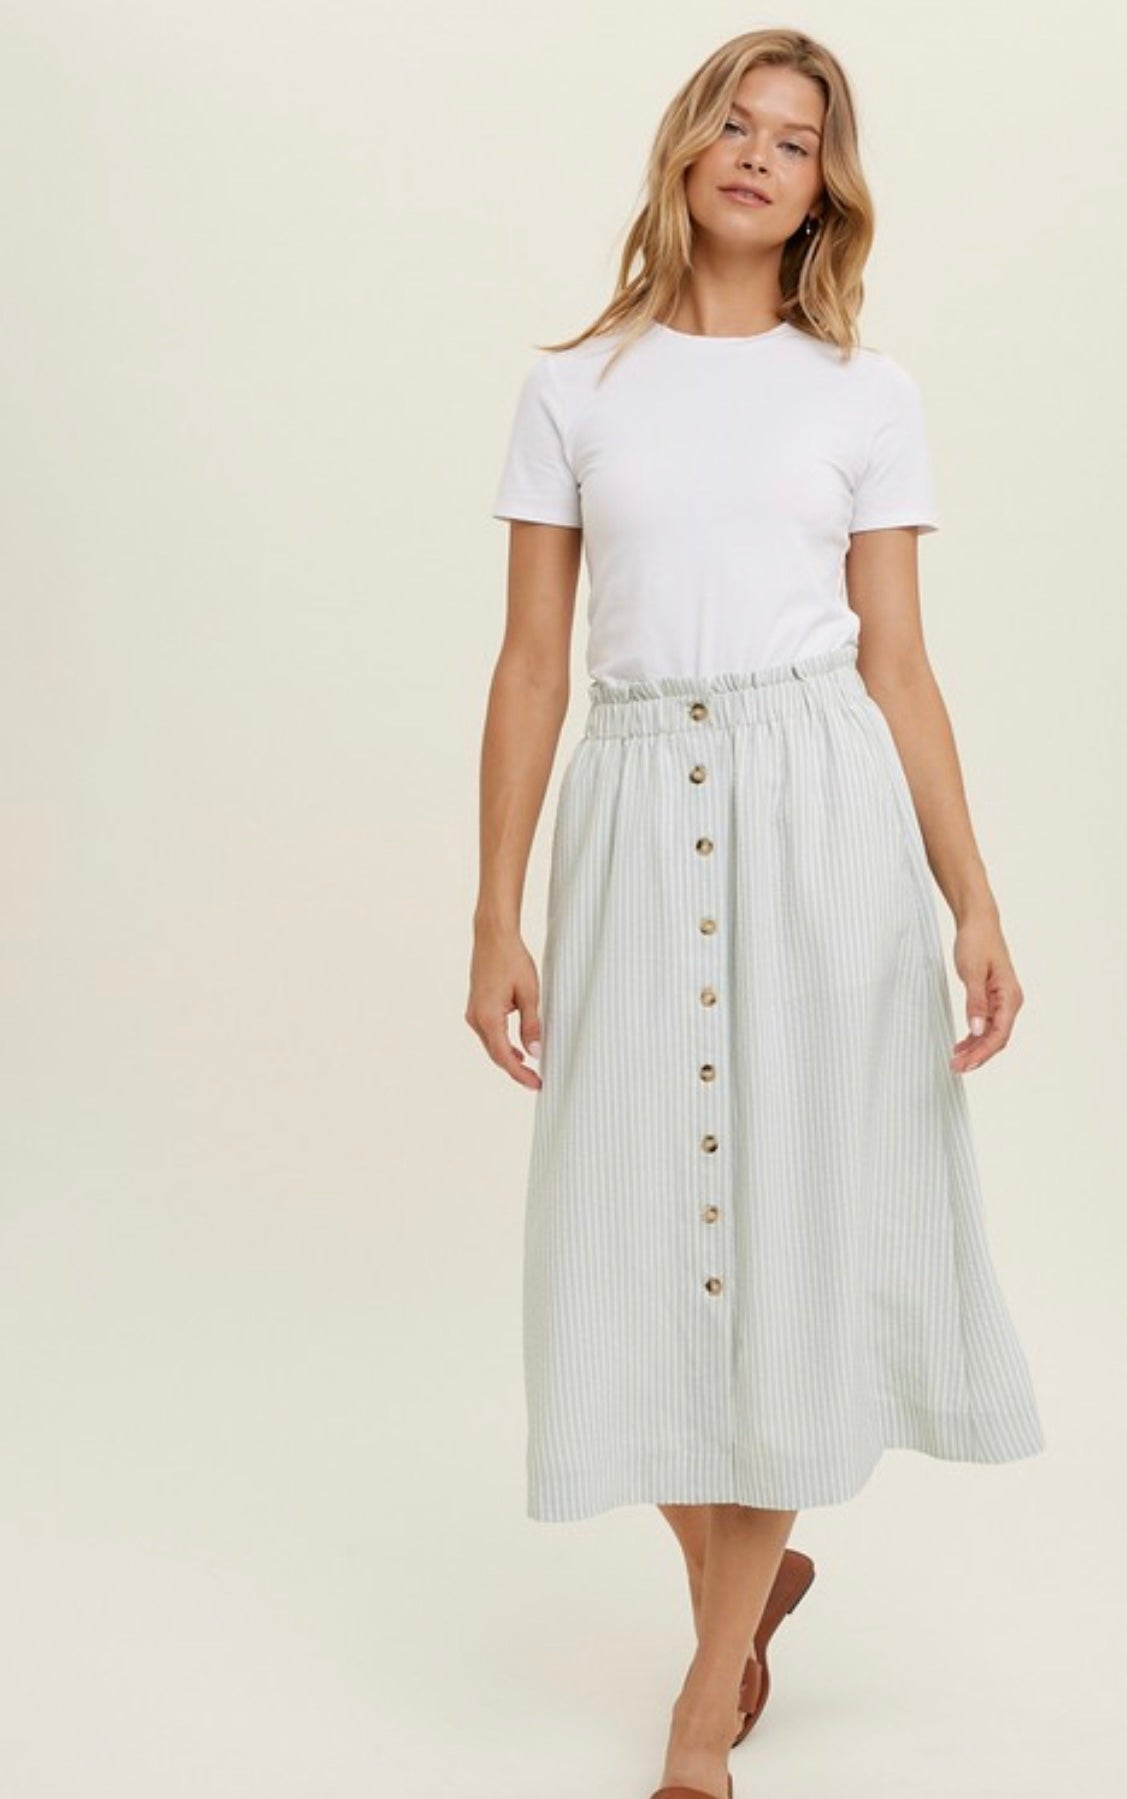 The Telly Skirt in Mint